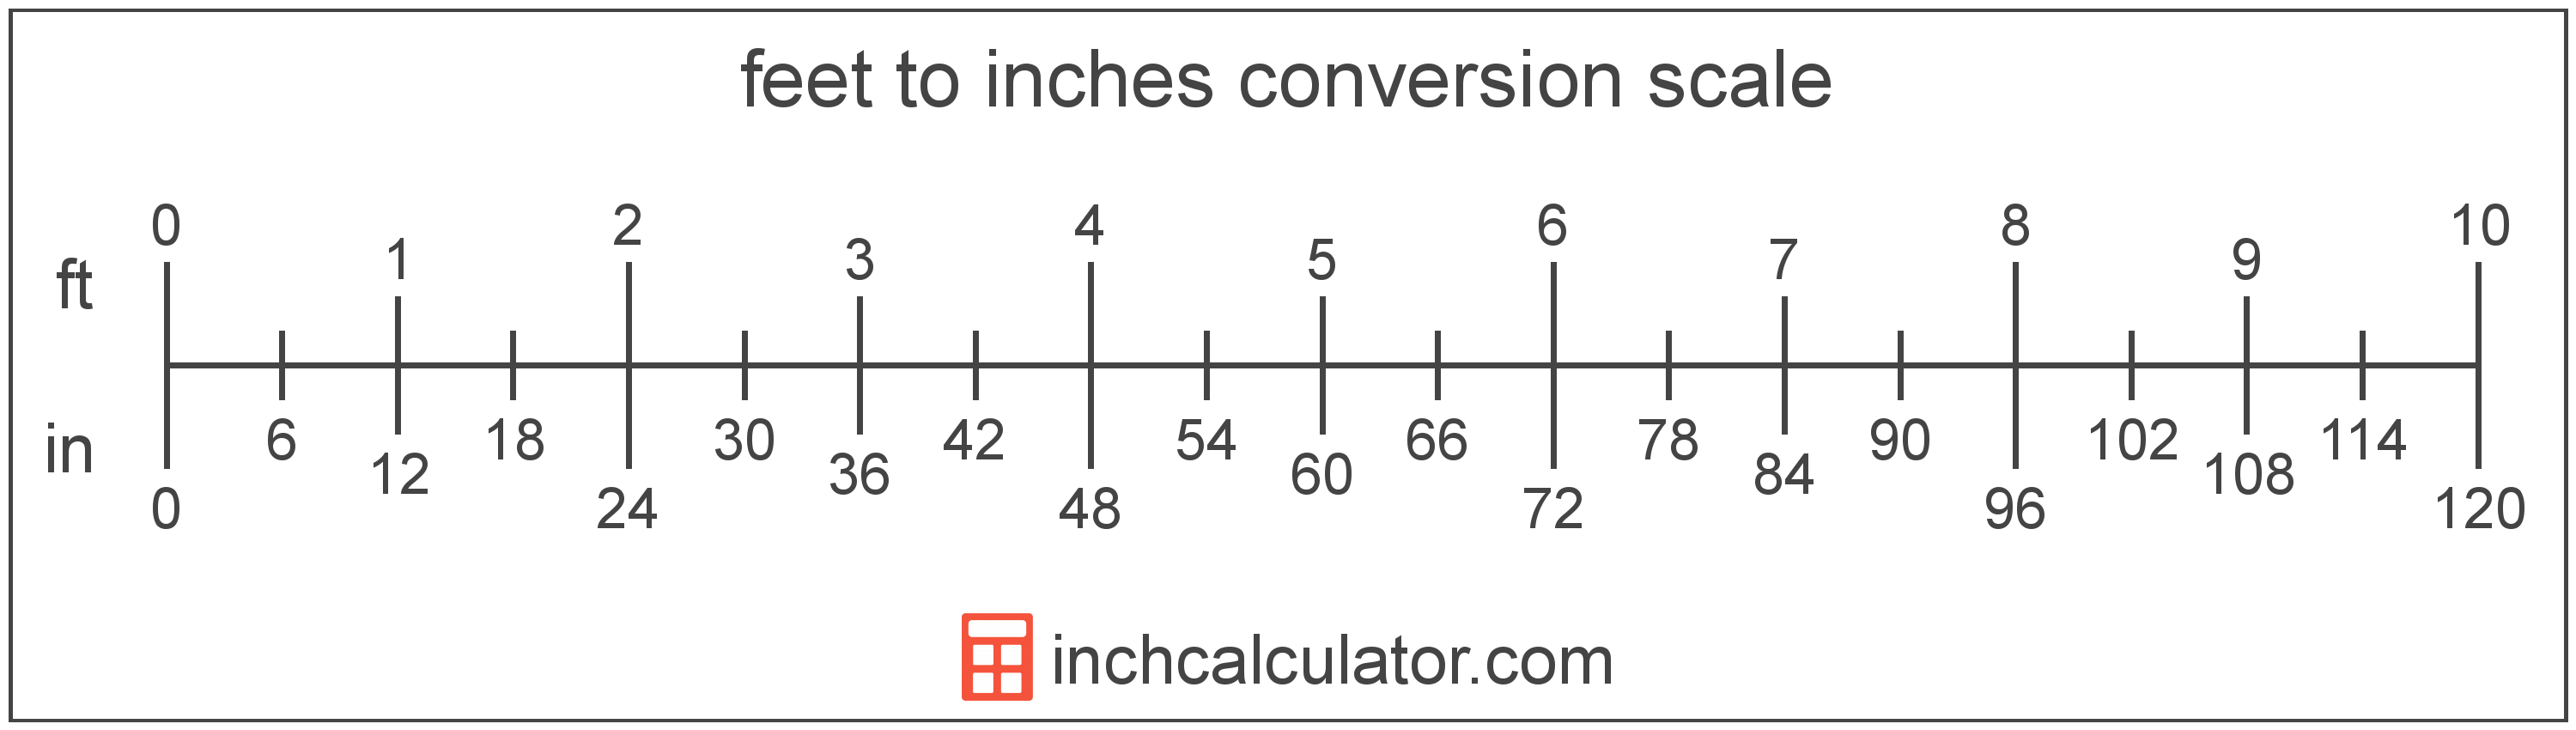 Inches to Feet Conversion Calculator (in to ft) - Inch Calculator